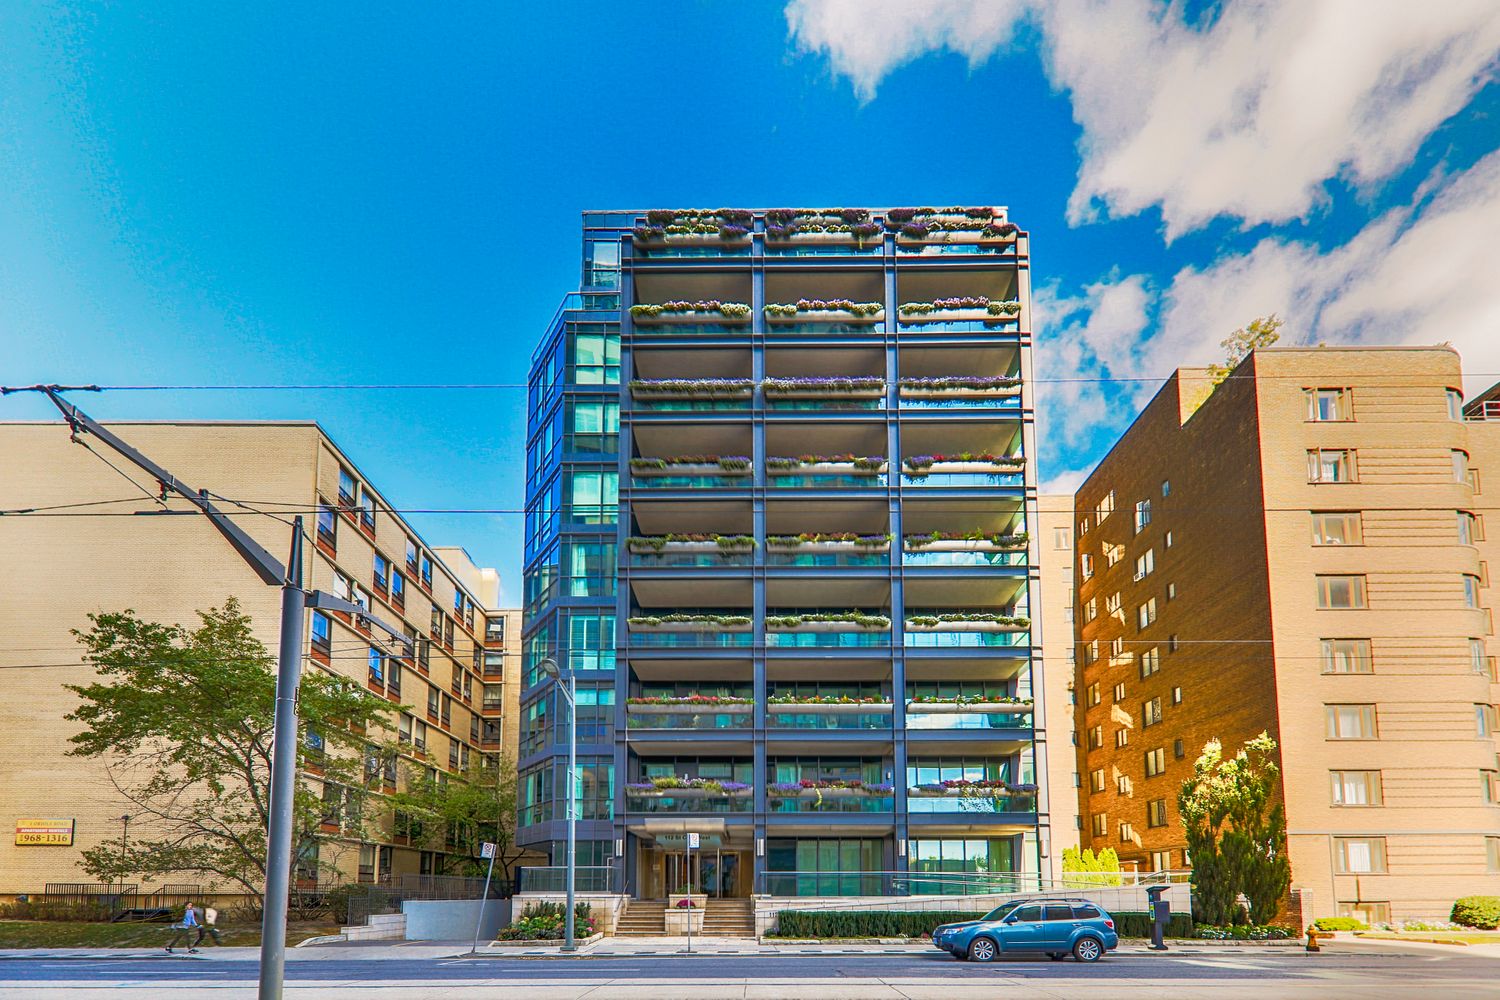 112 St Clair Avenue W. ONE12 St Clair is located in  Midtown, Toronto - image #2 of 4